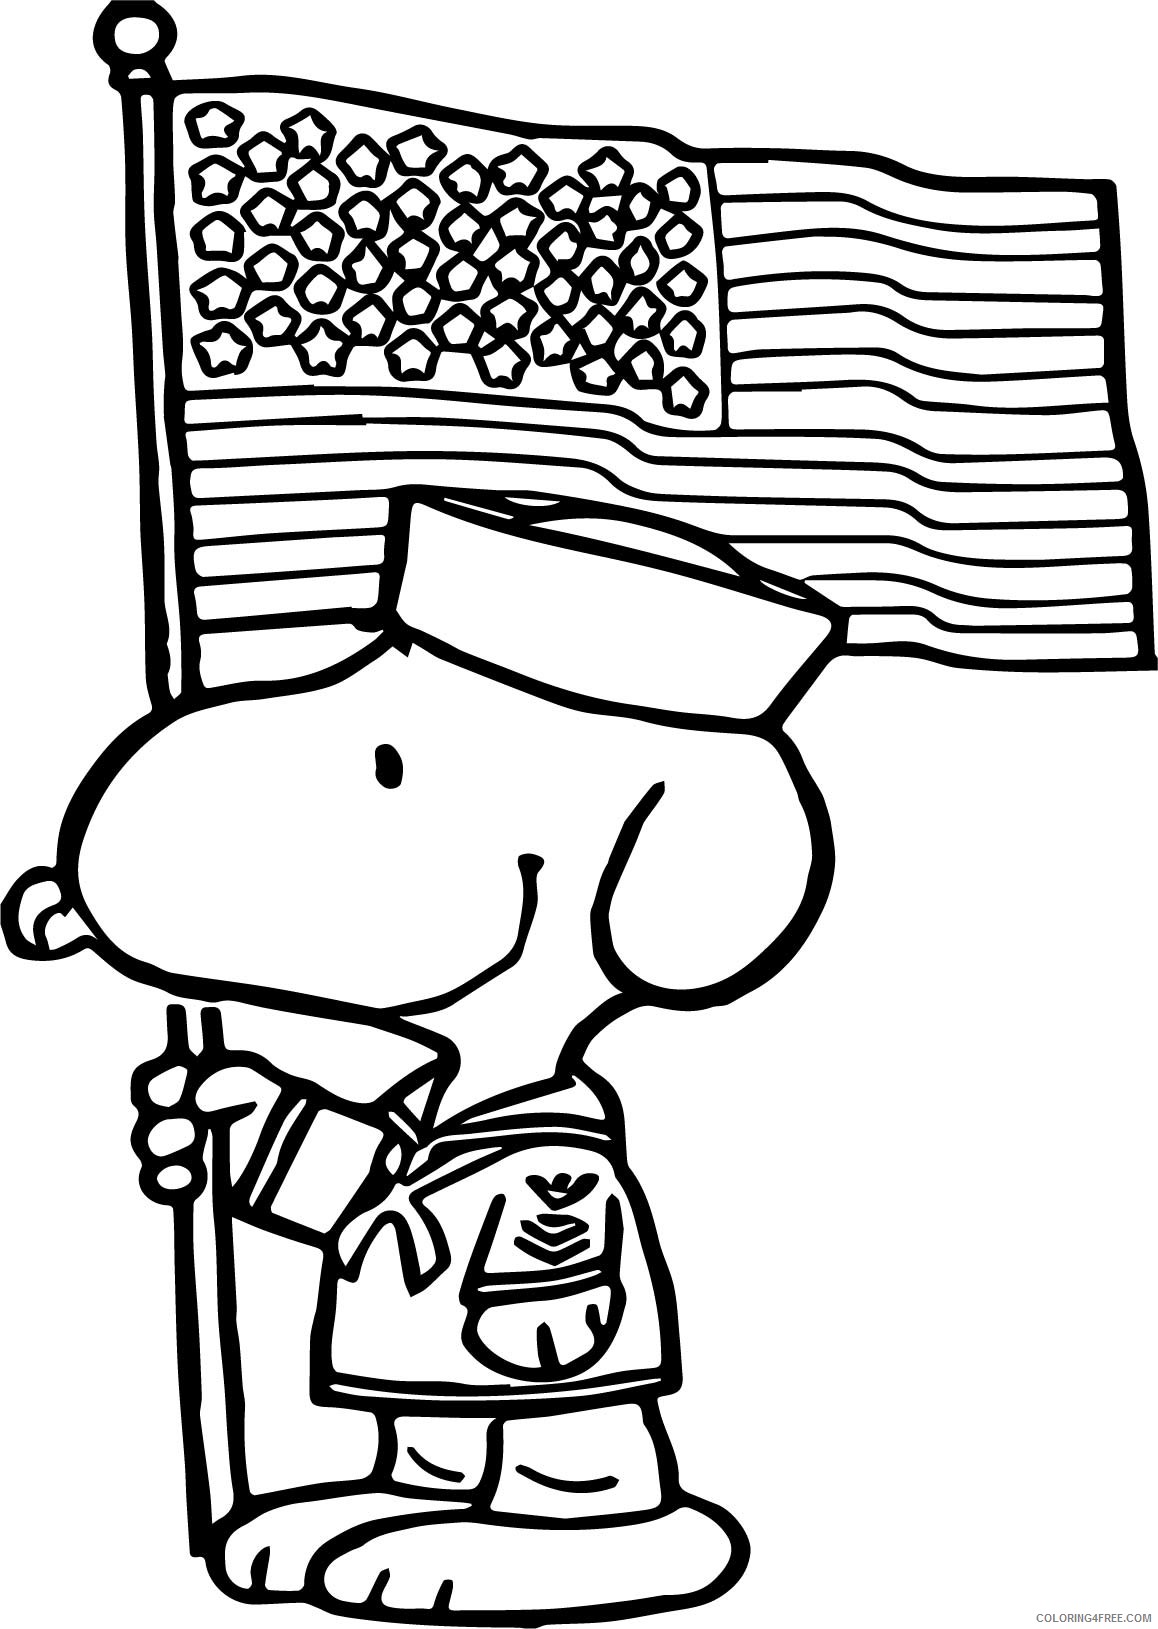 Snoopy Coloring Pages Cartoons Patriotic Snoopy Flag Day Printable 2020 5645 Coloring4free